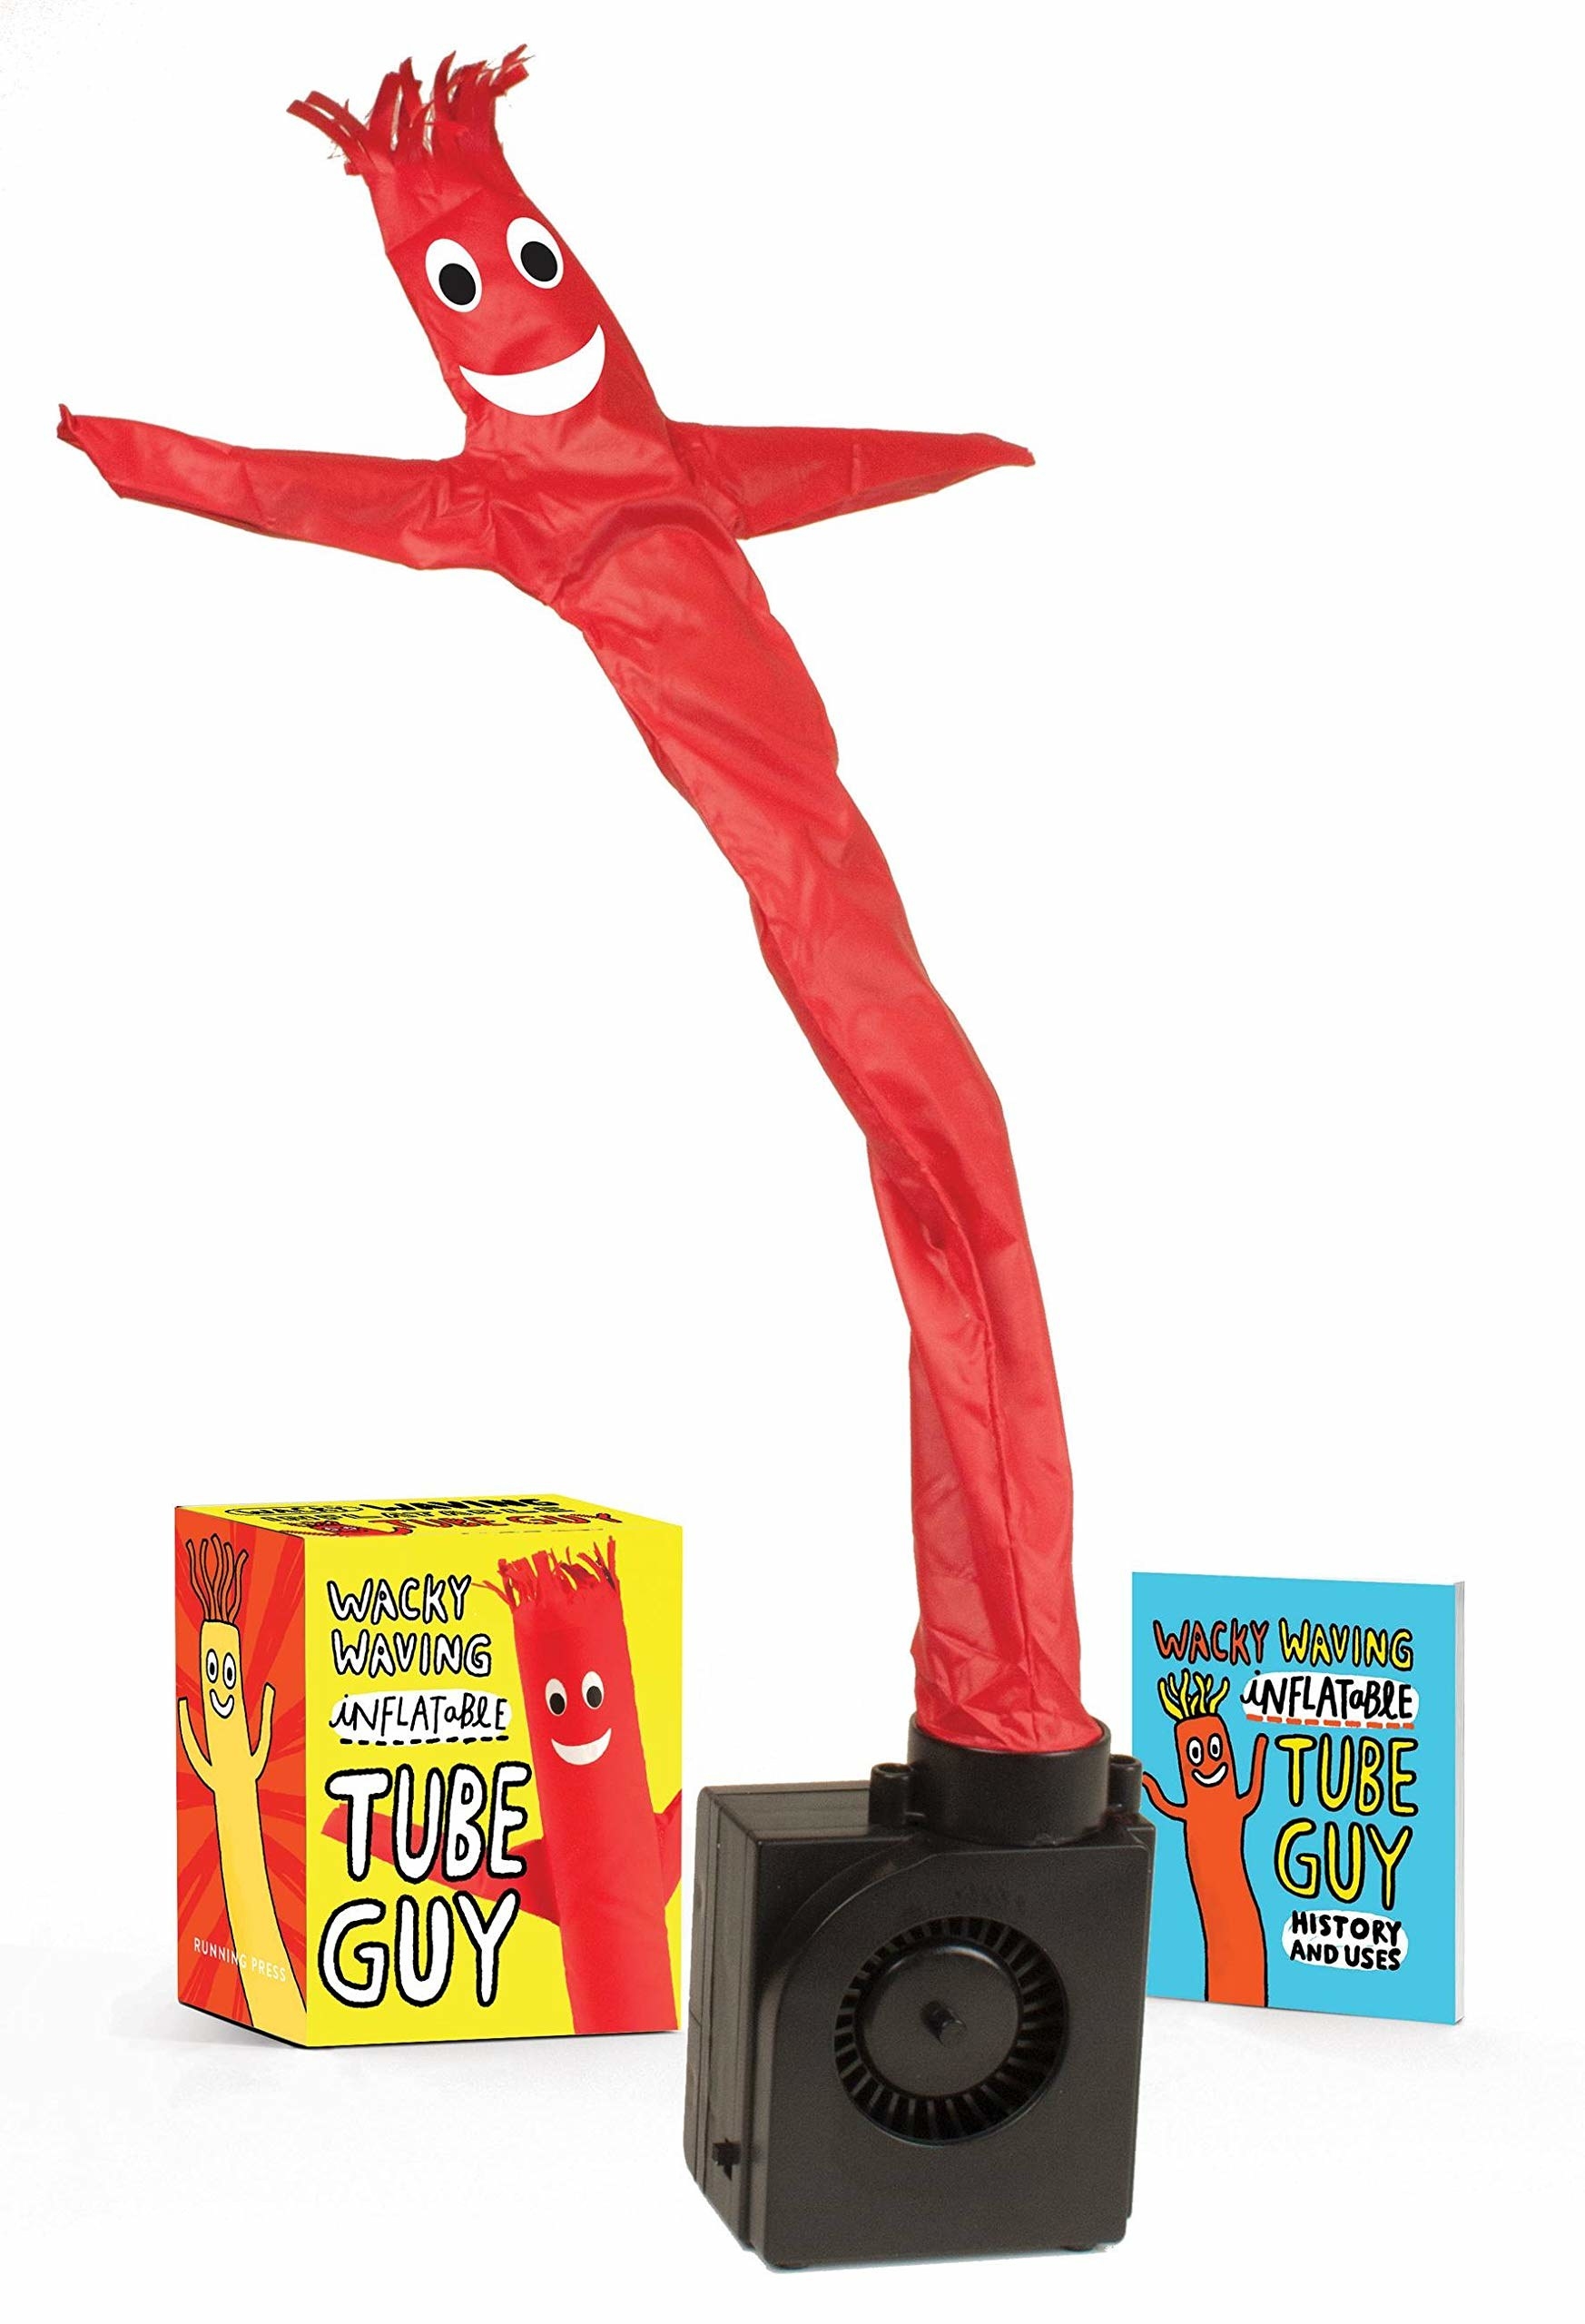 A red-coloured wacky inflatable tube guy next to the packaging 